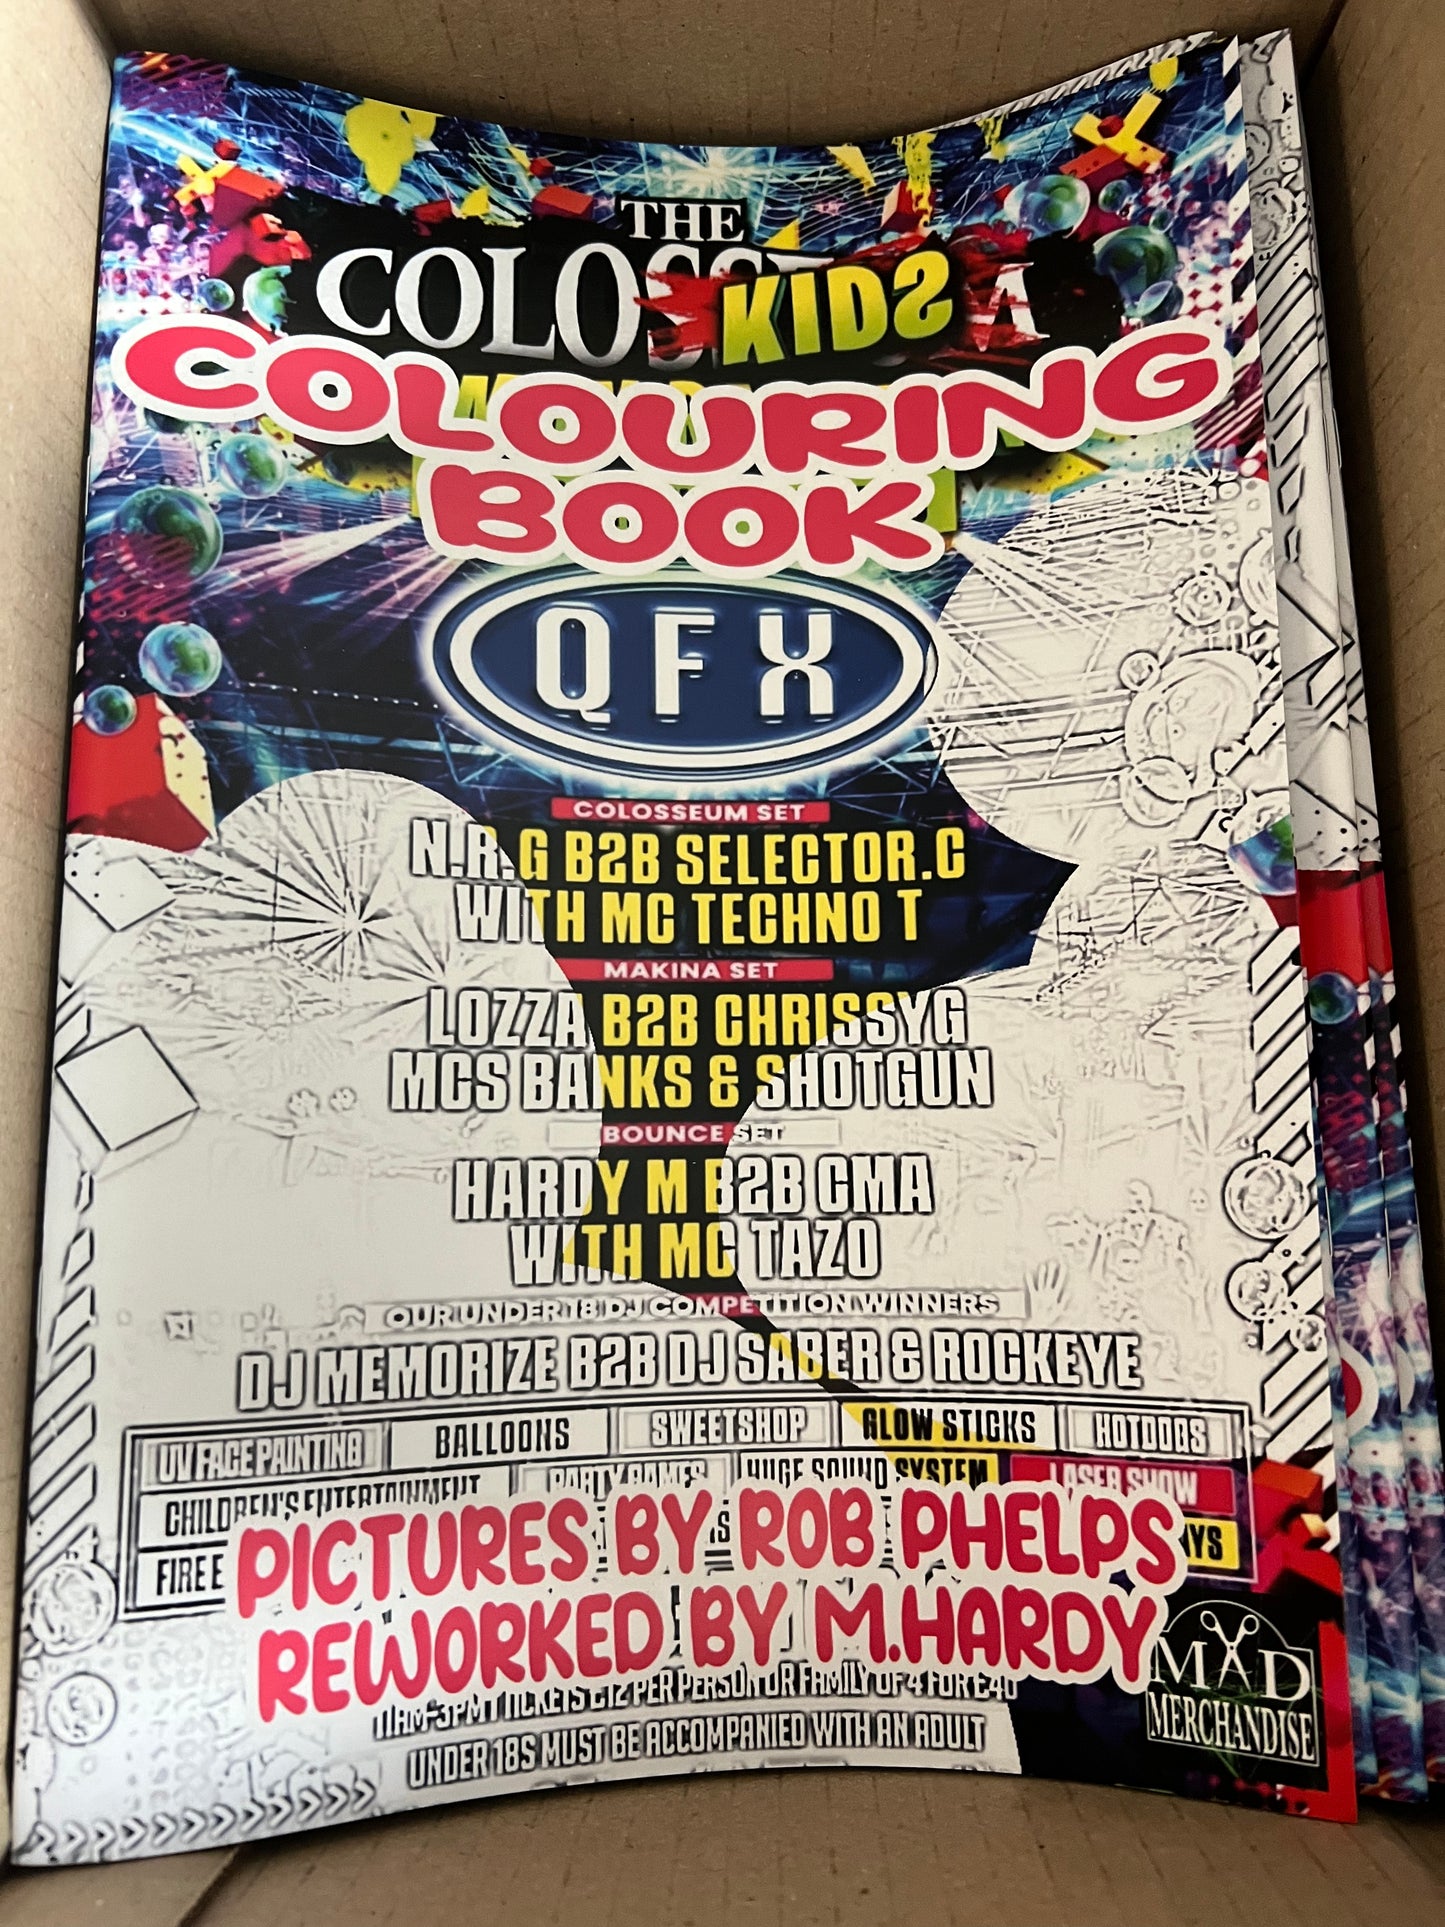 Colokids colouring book